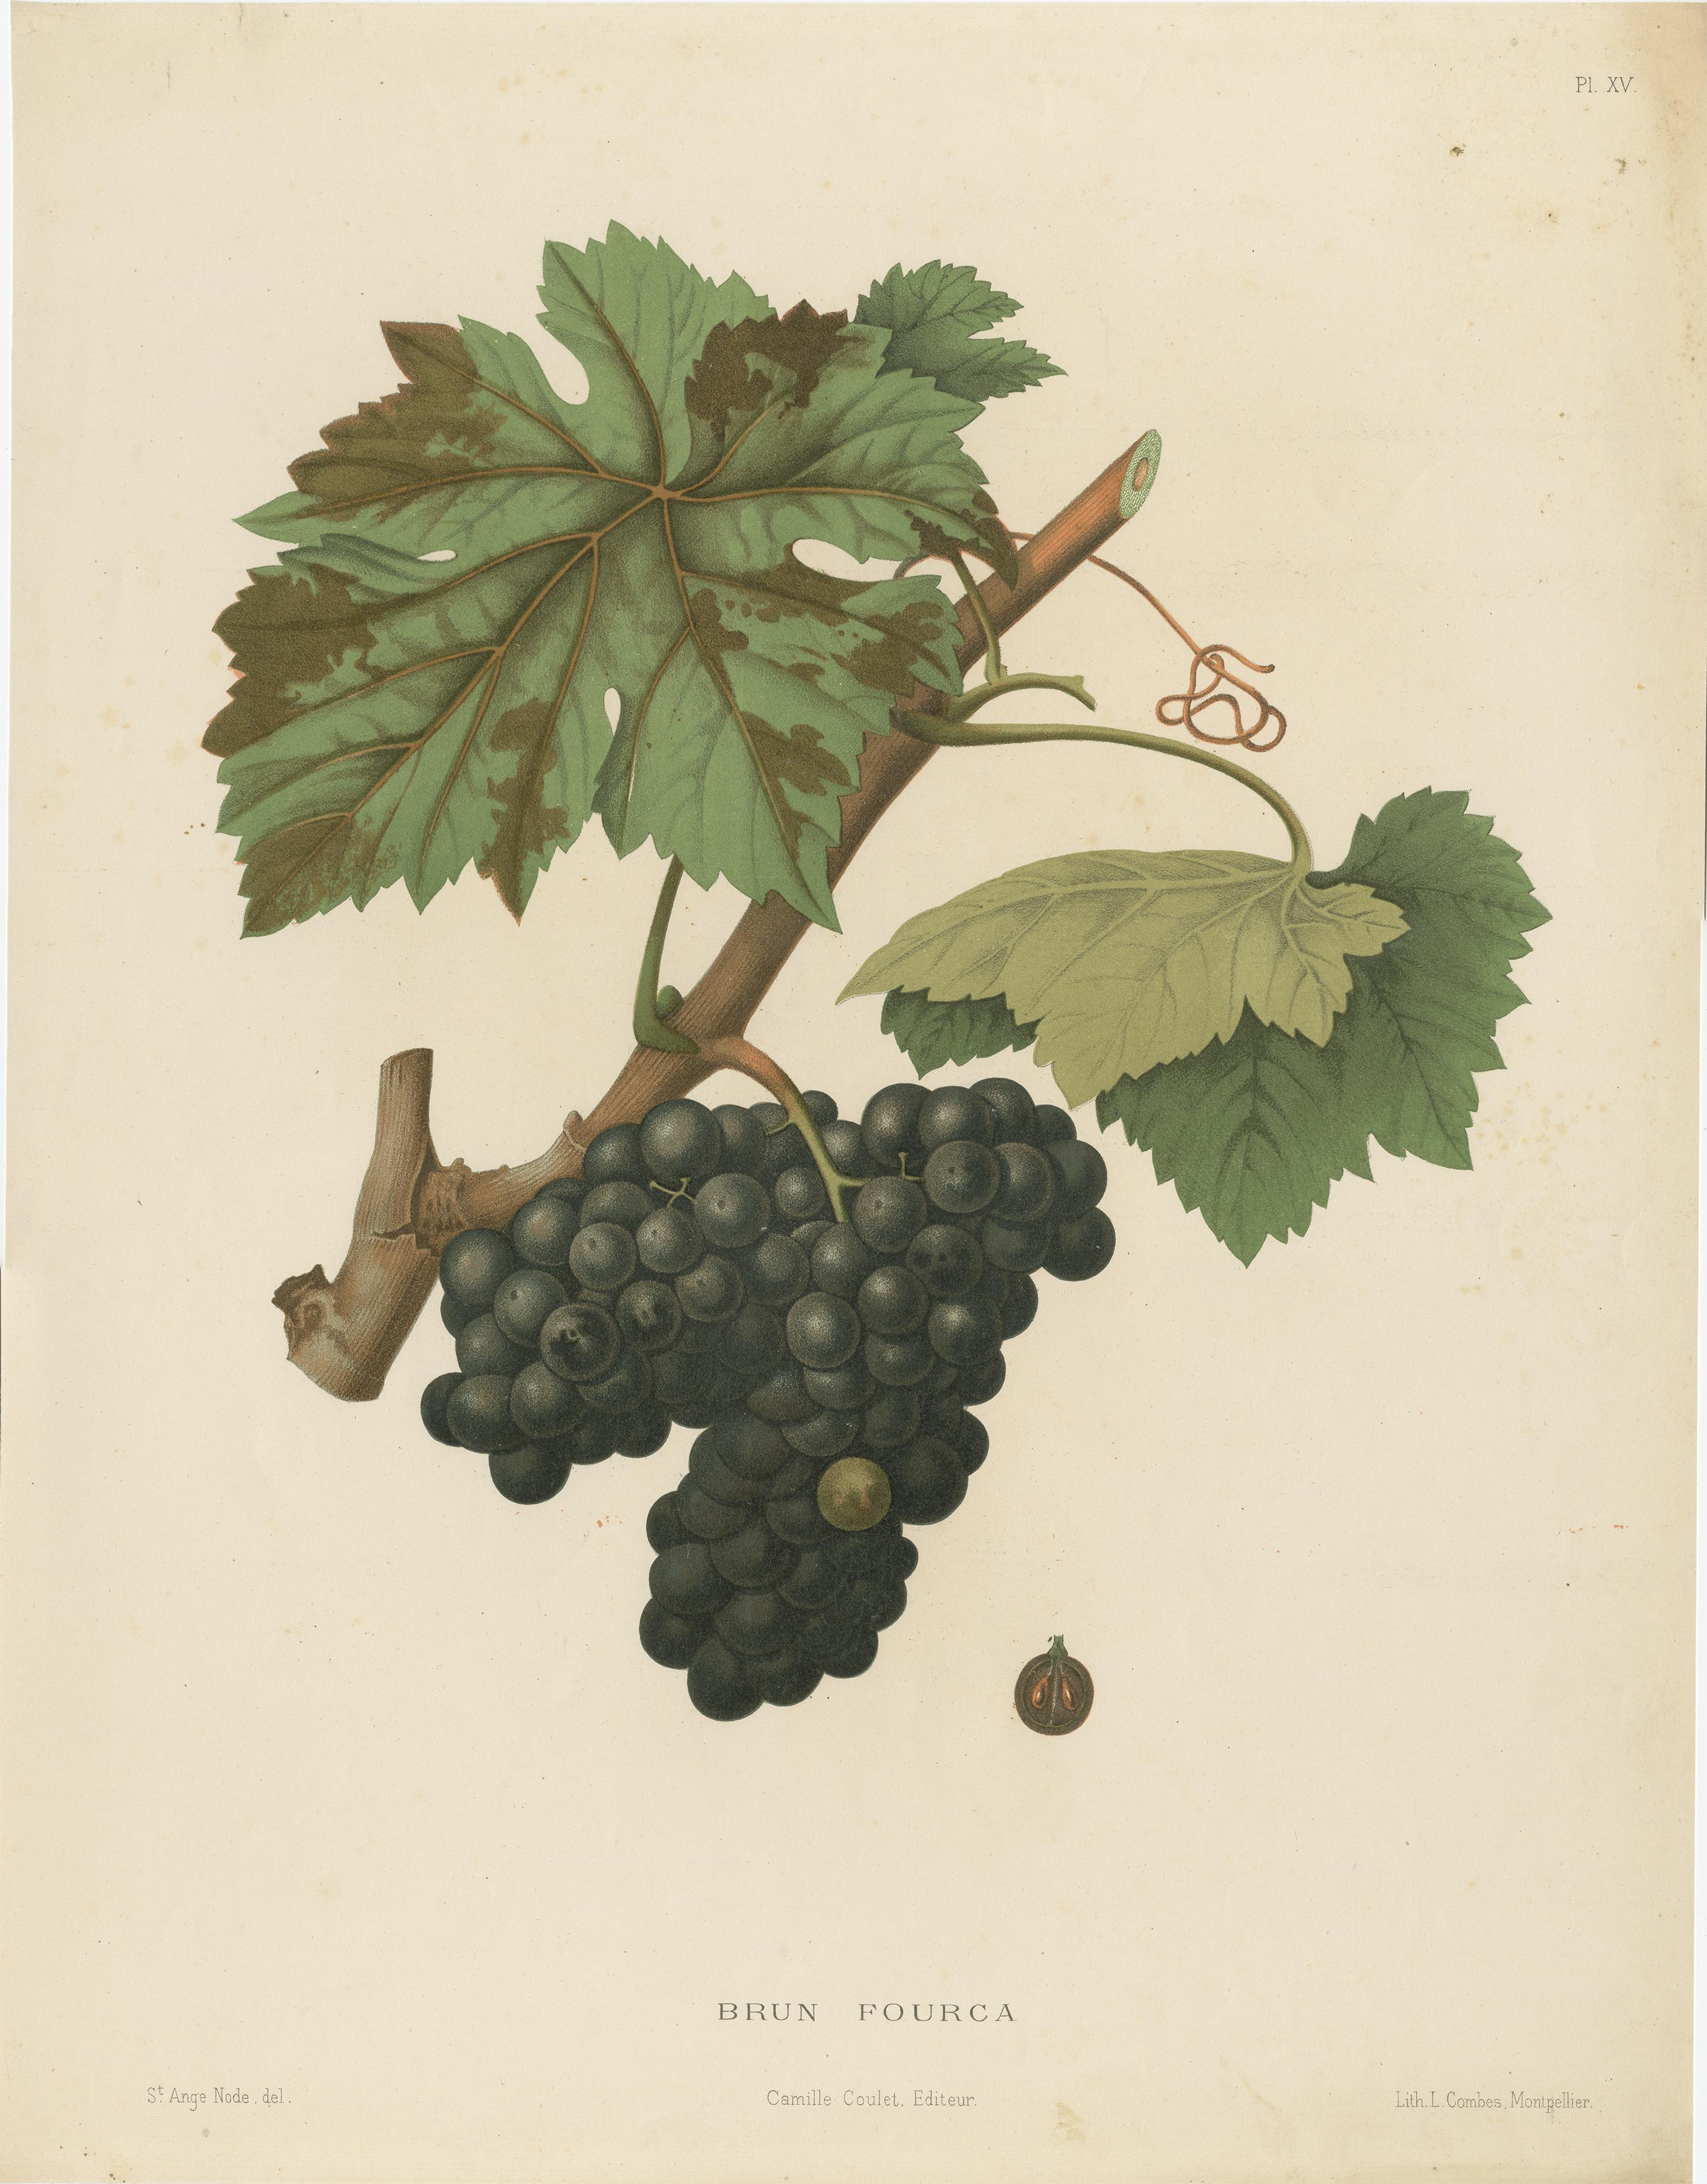 Beautiful and decorative large lithograph of the Brun Fourca variety of grapes. 

A nice print to have on the wall for every wine lover. Original Hand-coloured in the 19th century.

From the work: 'Description of the main grape varieties of the